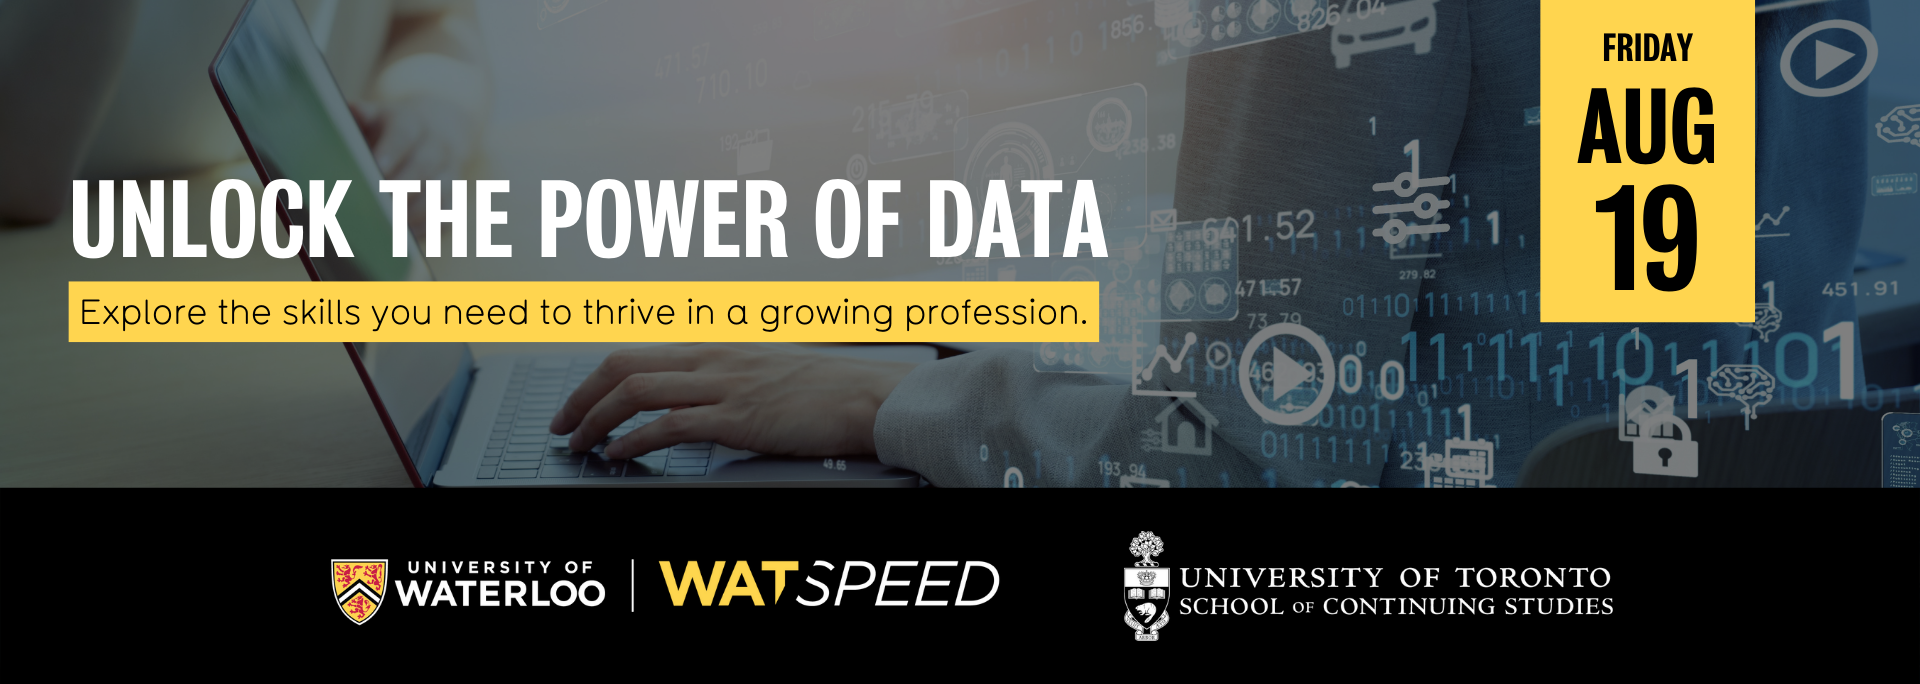 STRATEGIZE AND lead with data Get an introduction to the power of predictive analytics.